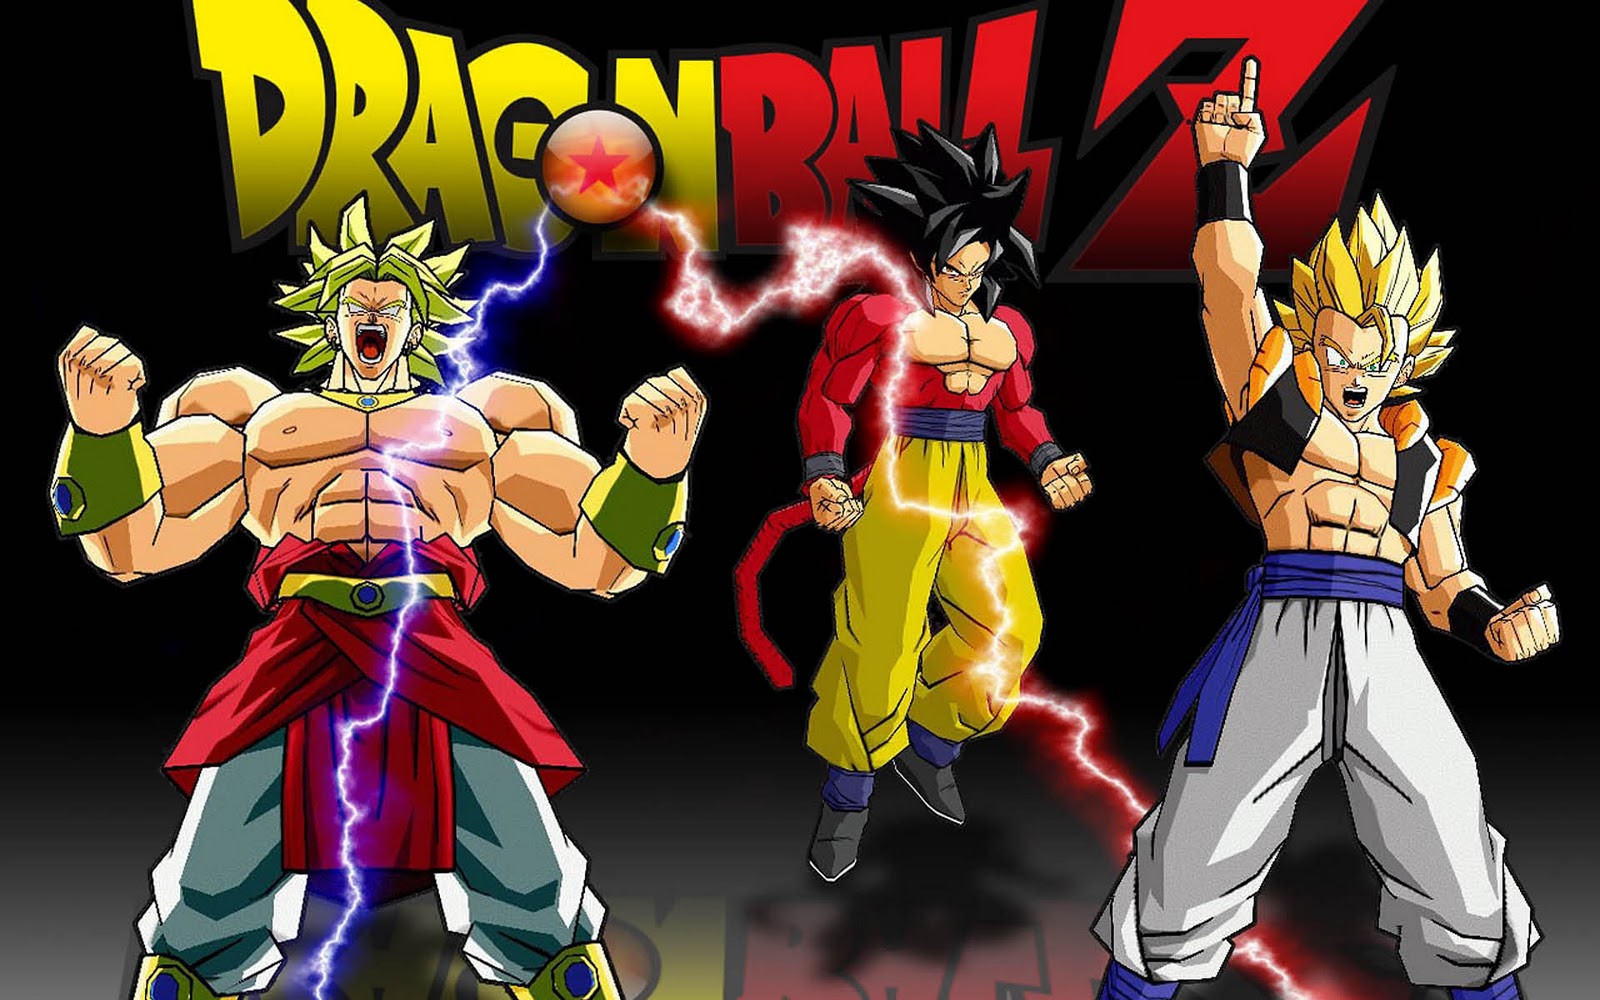   pictures dragonball wallpapers hd dragonball wallpaper images 26jpg